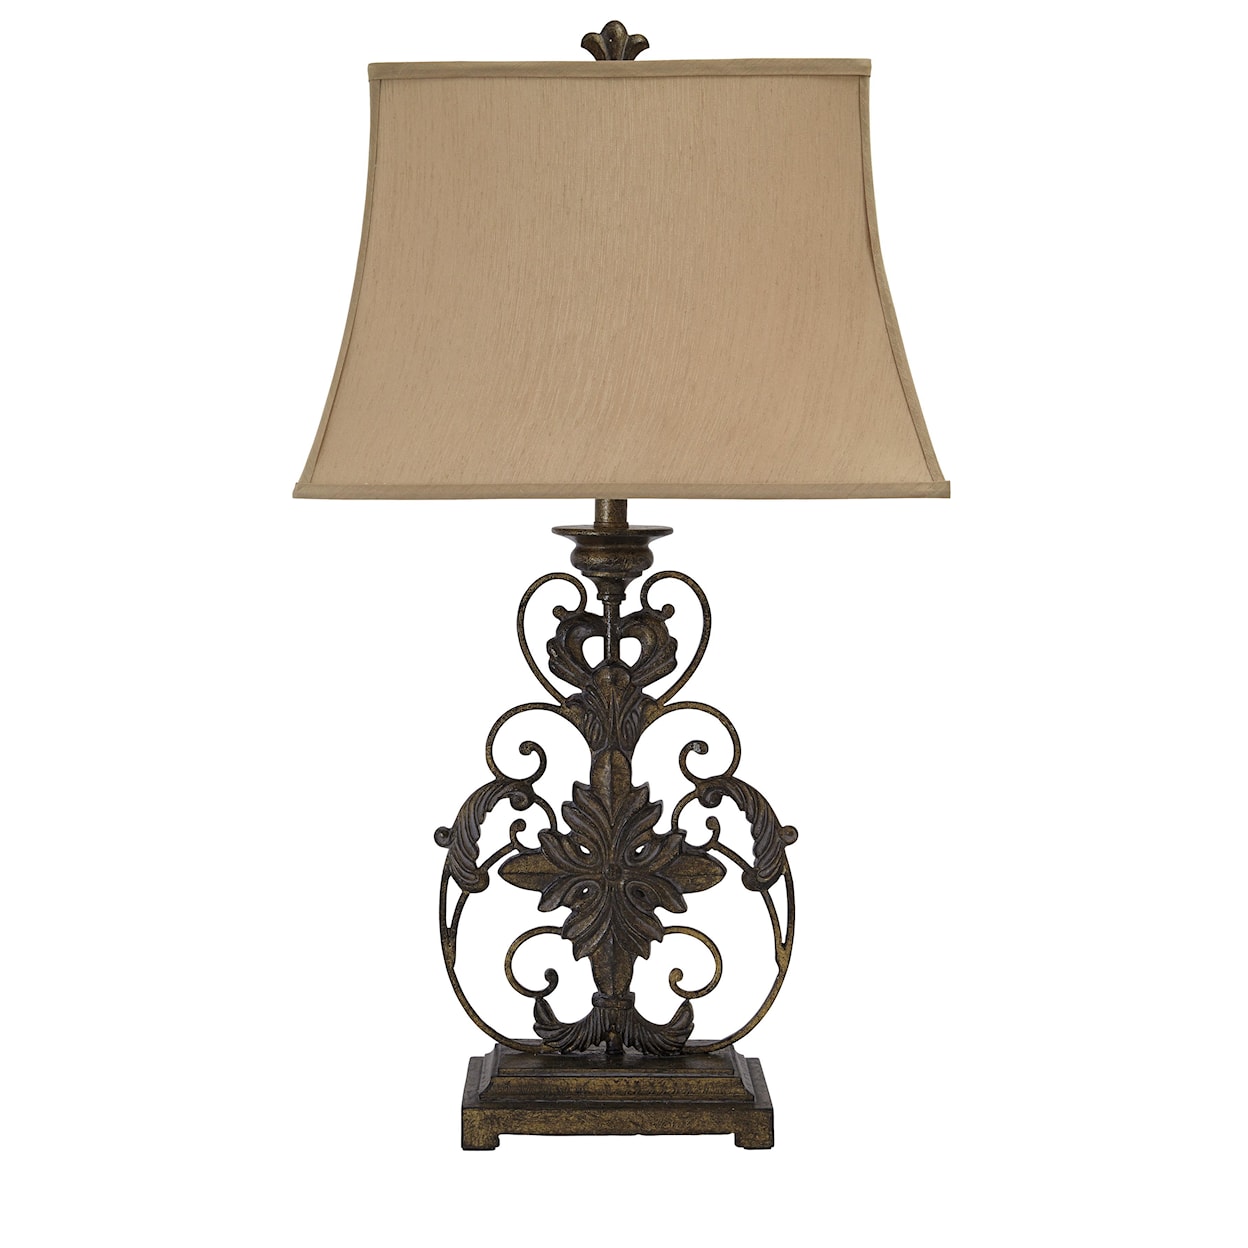 Signature Design by Ashley Lamps - Traditional Classics Metal Table Lamp 